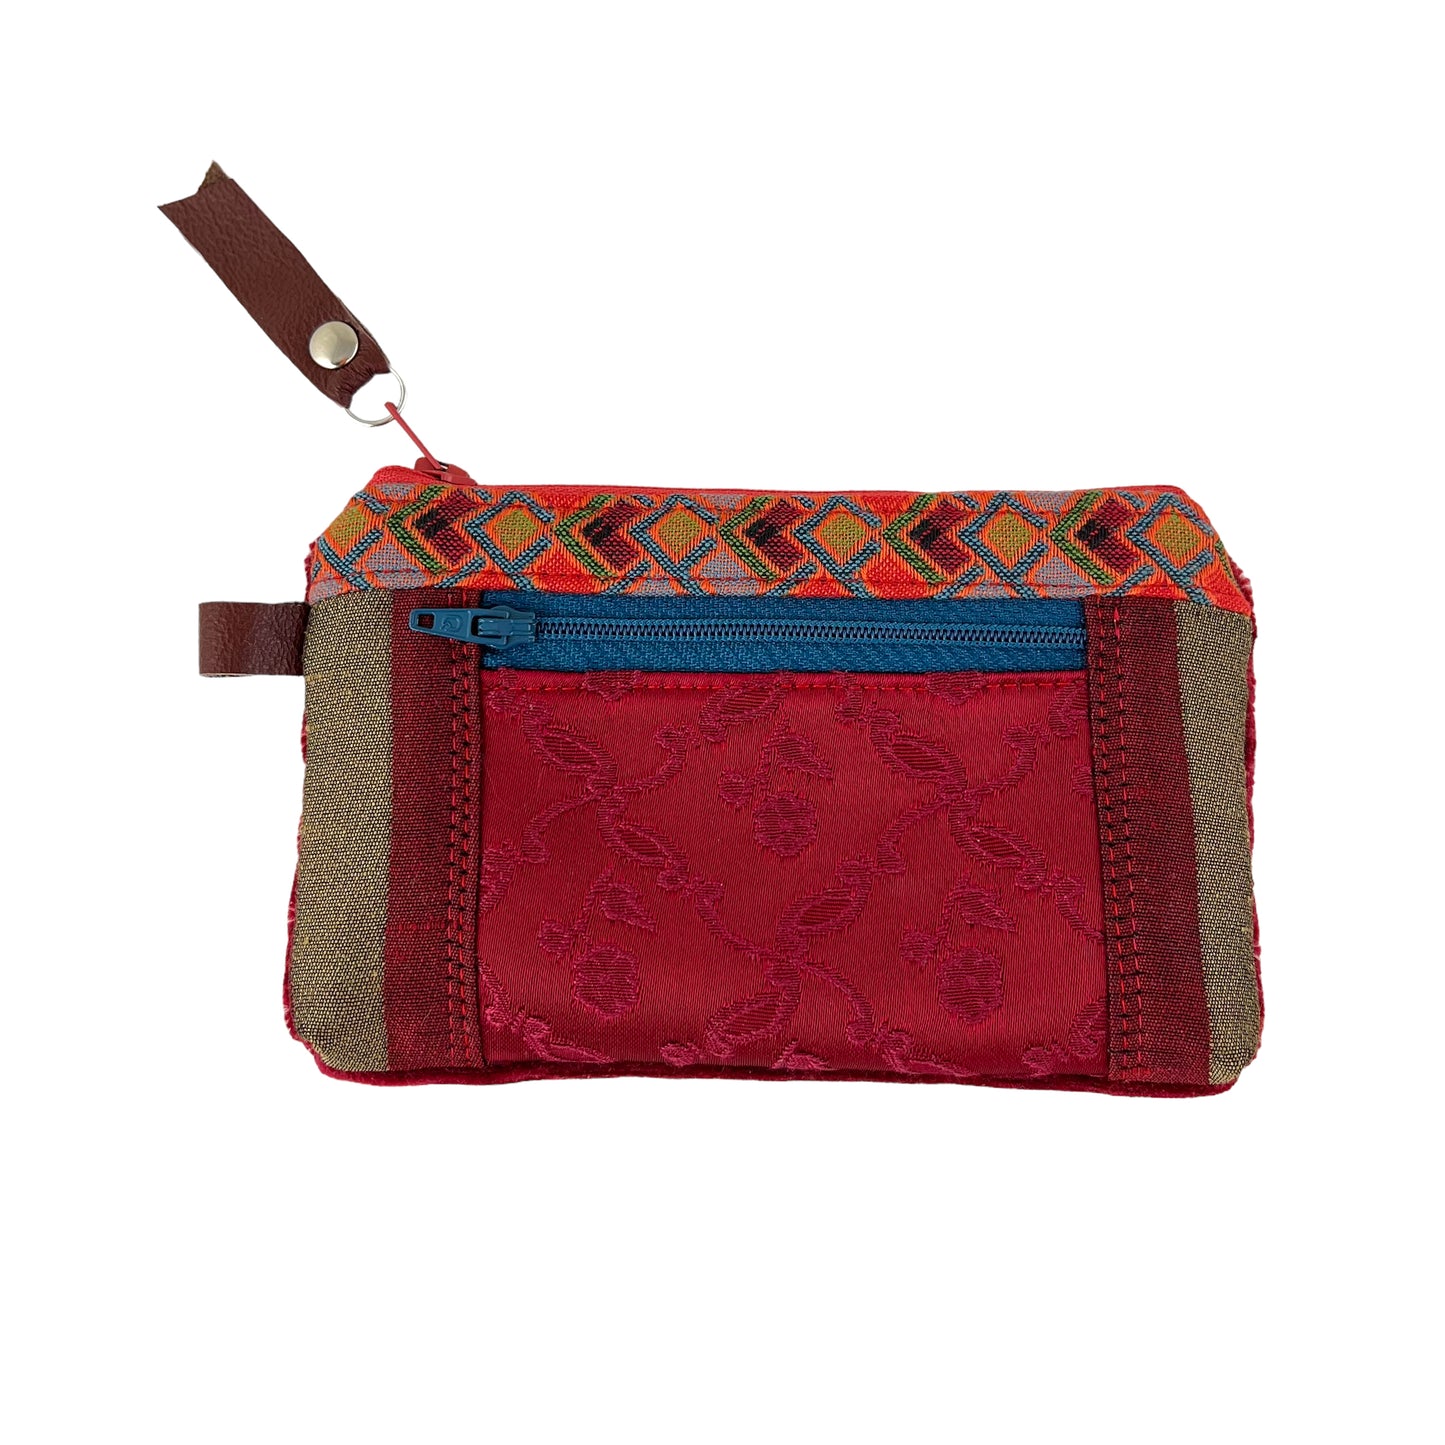 Small Zipper Card Tapestry Wallet Red Orange Teal Patchwork